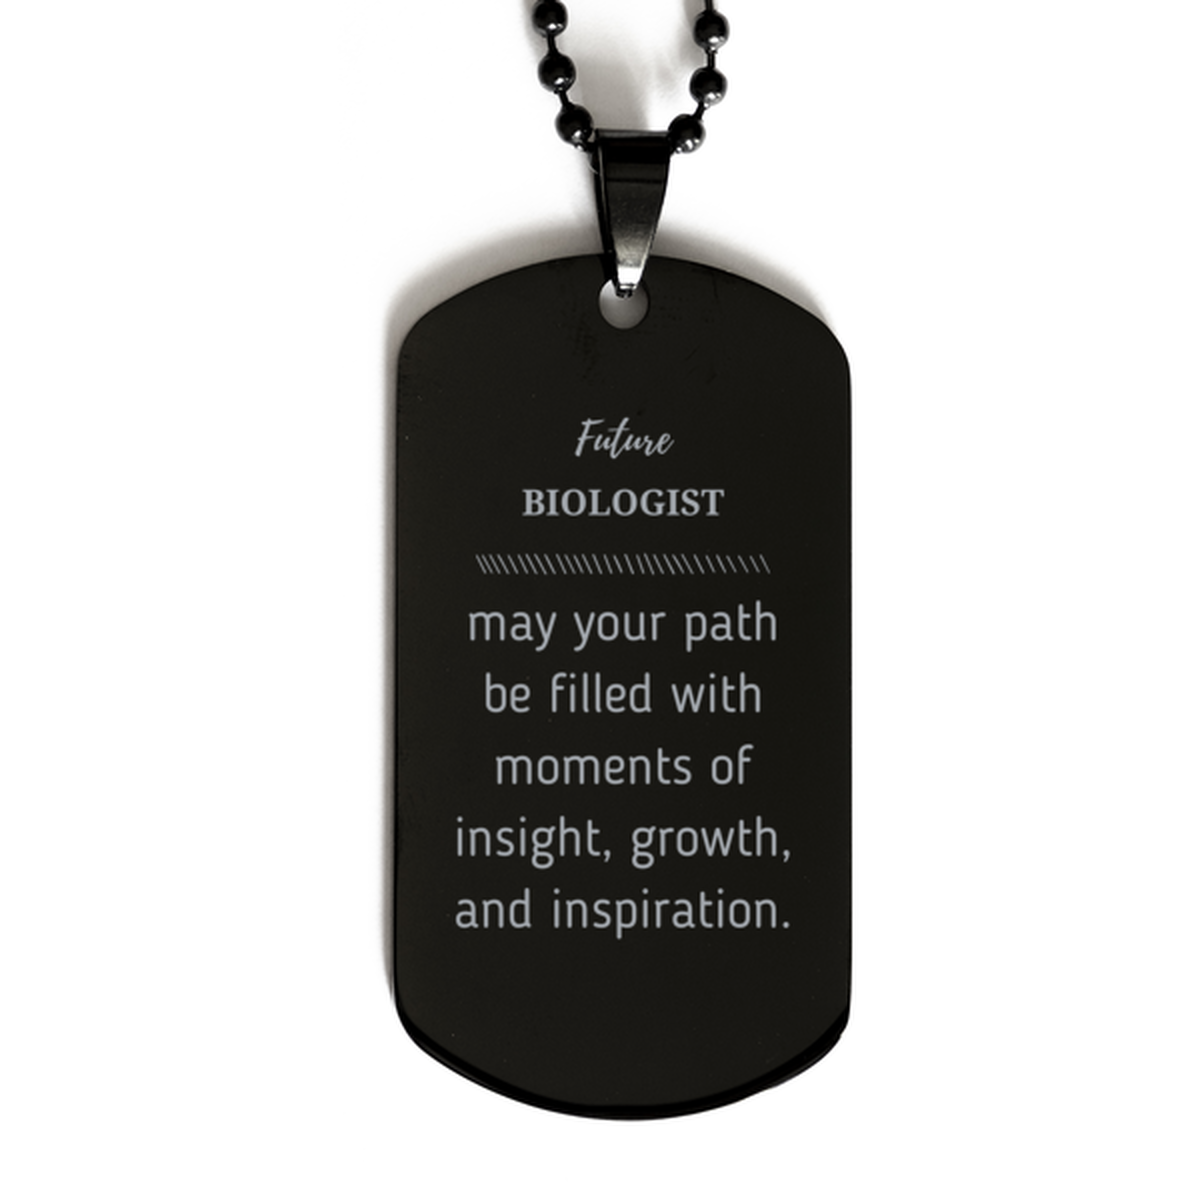 Future Biologist Gifts, May your path be filled with moments of insight, Graduation Gifts for New Biologist, Christmas Unique Black Dog Tag For Men, Women, Friends